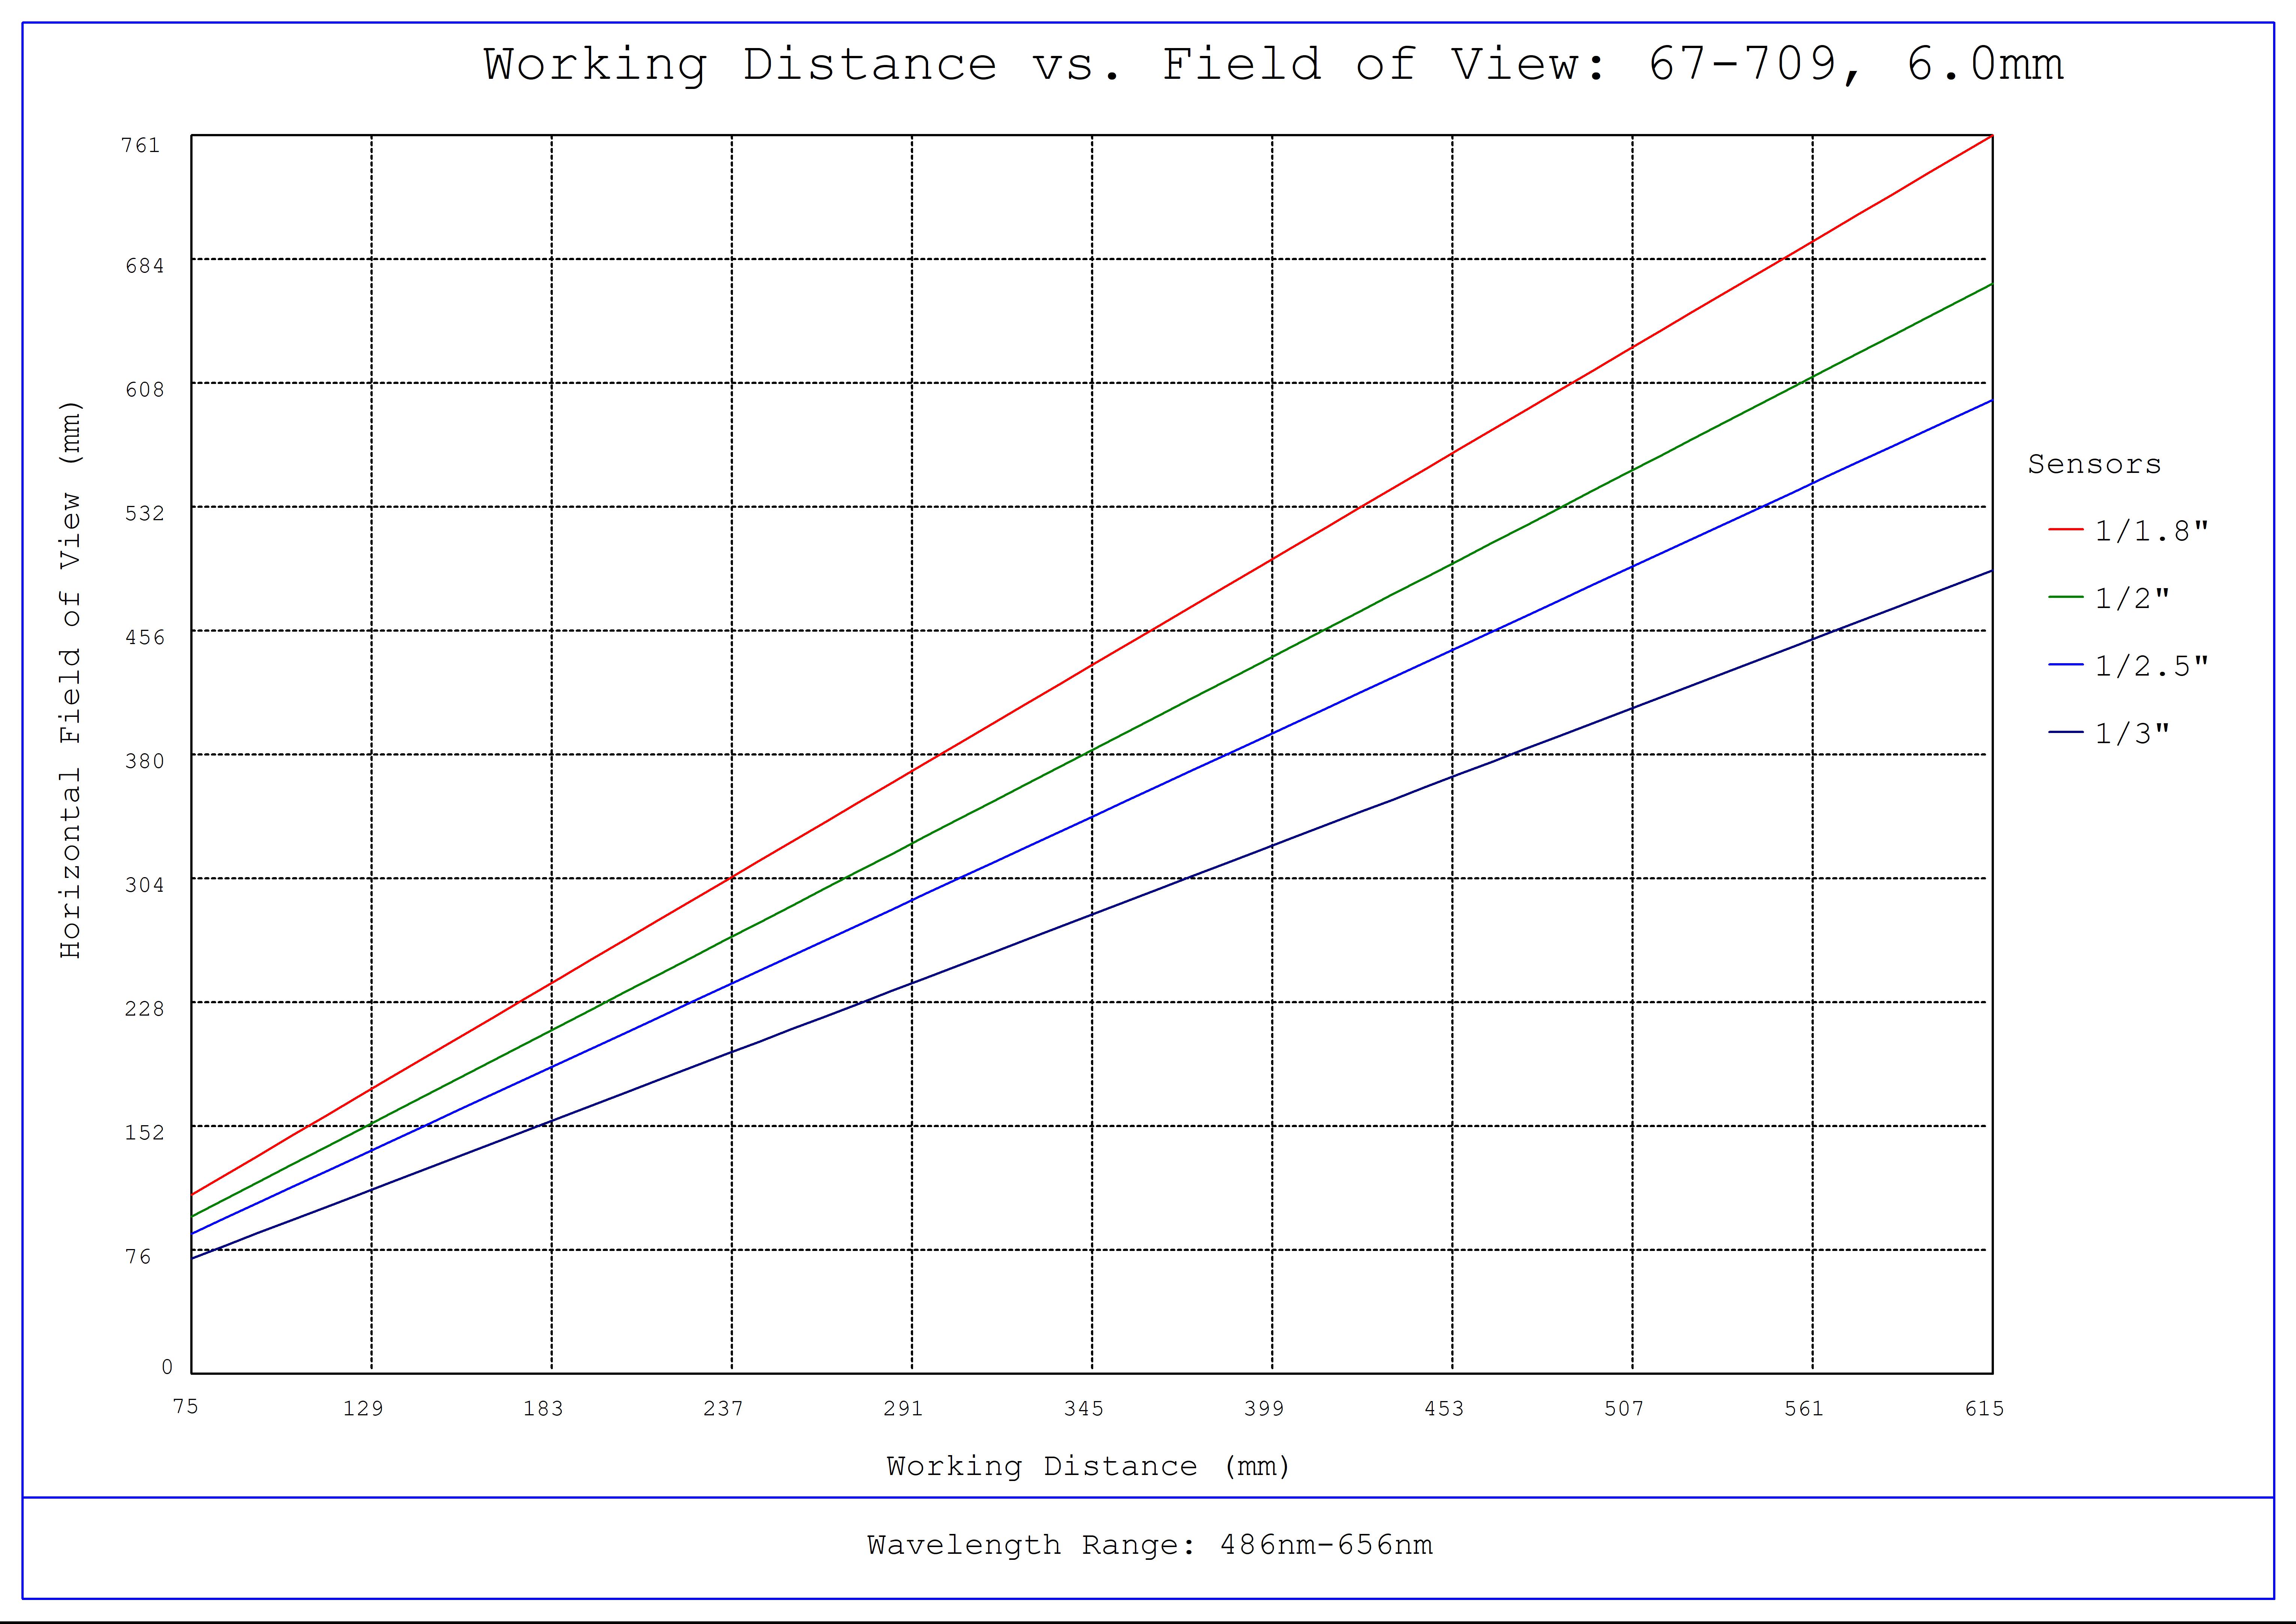 #67-709, 6mm C Series Fixed Focal Length Lens, Working Distance versus Field of View Plot